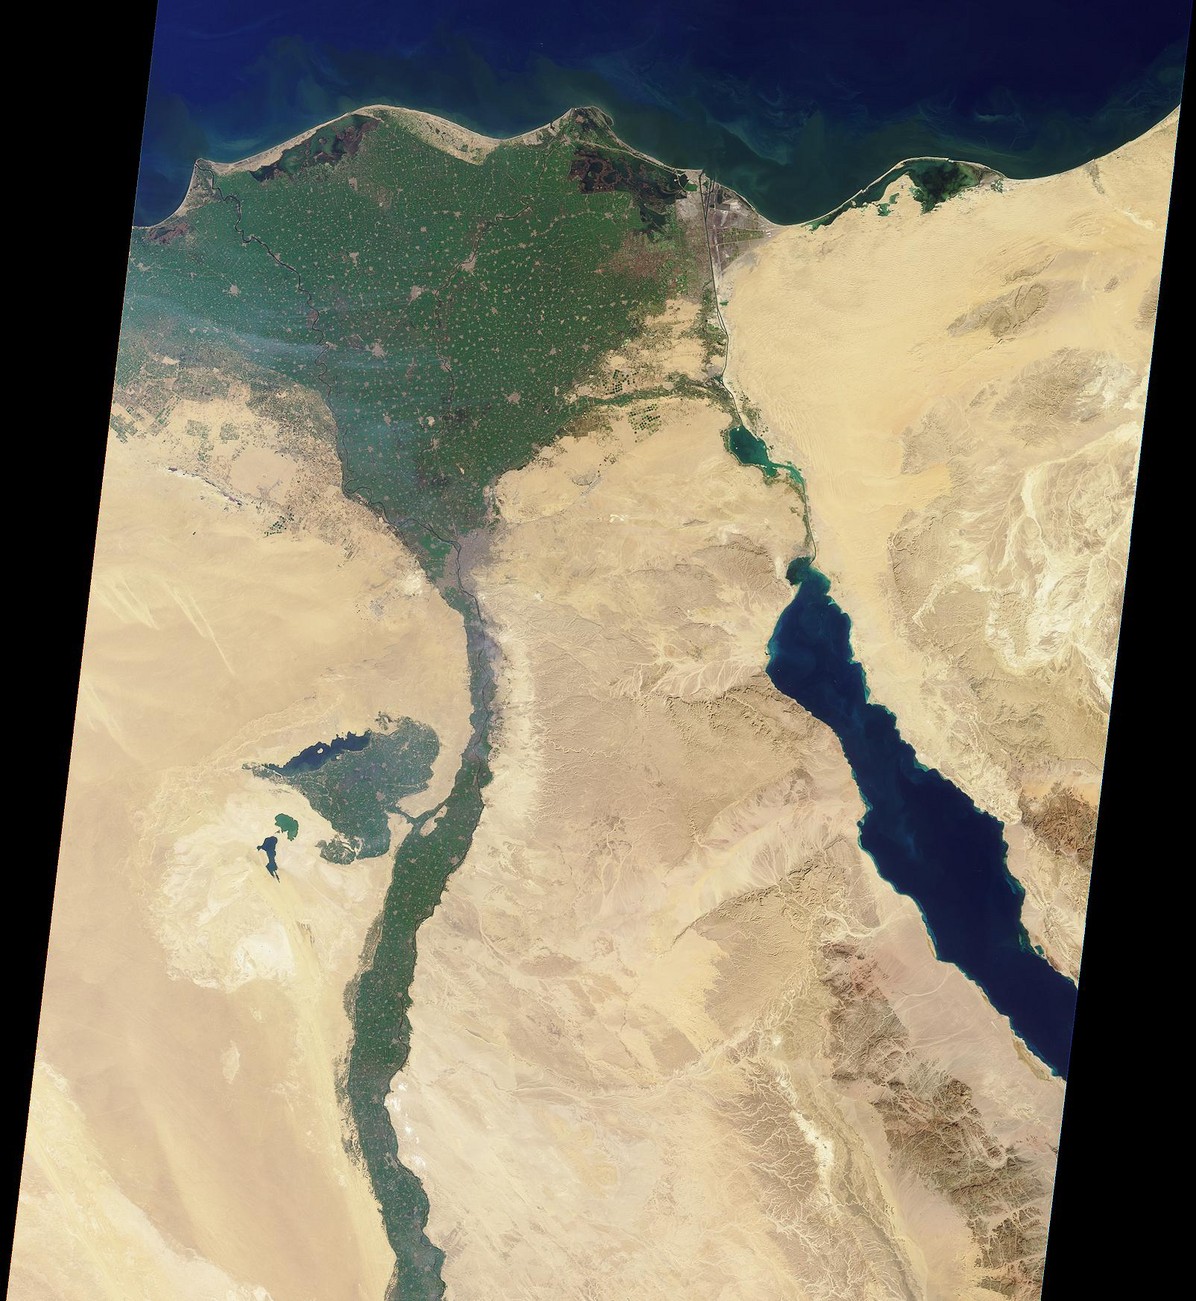 About 95 percent of Egypt’s population lives along the Nile, making the river valley one of the most densely populated areas in the world. © NASA/GSFC/JPL, MISR Team 